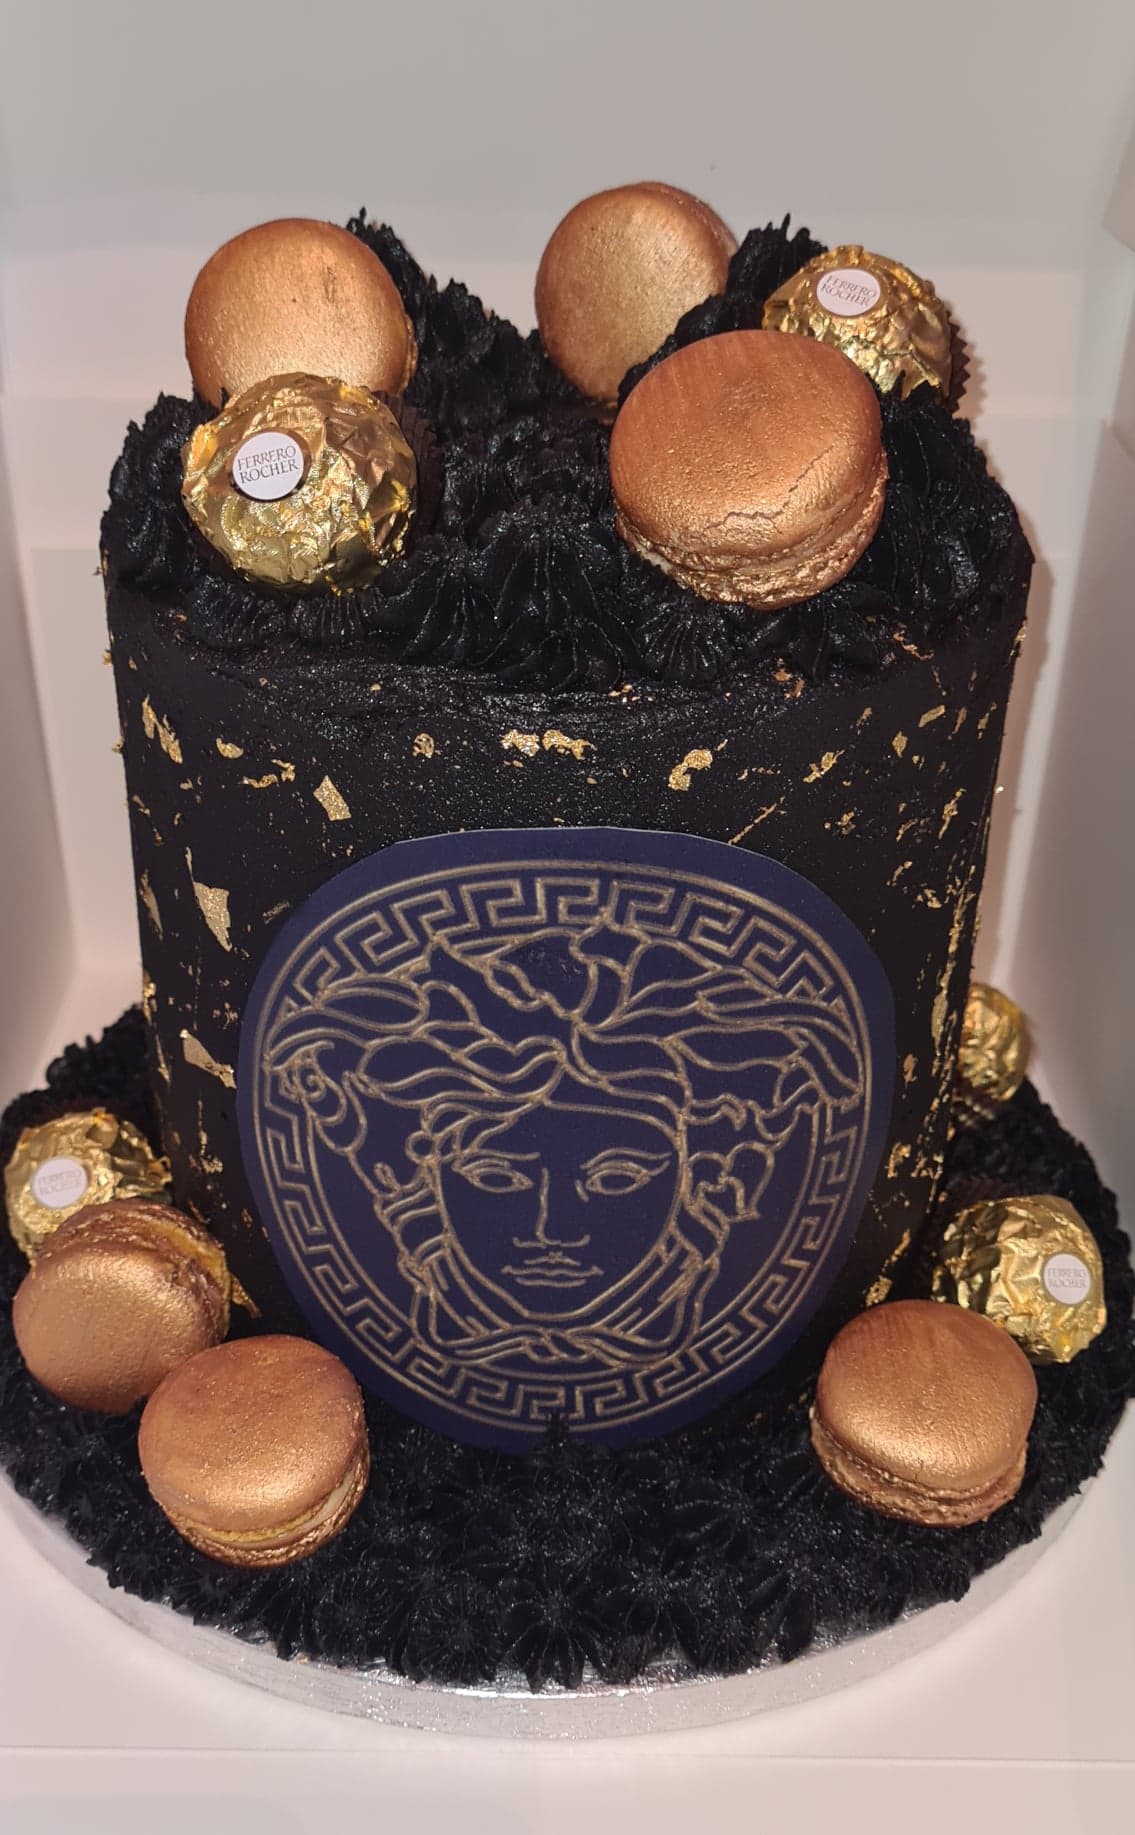 Want something Versace but don't want to pay an arm and leg? Come get a cake  instead #nataliebakery #Versace | Birthday cakes for men, Cakes for men,  Gucci cake